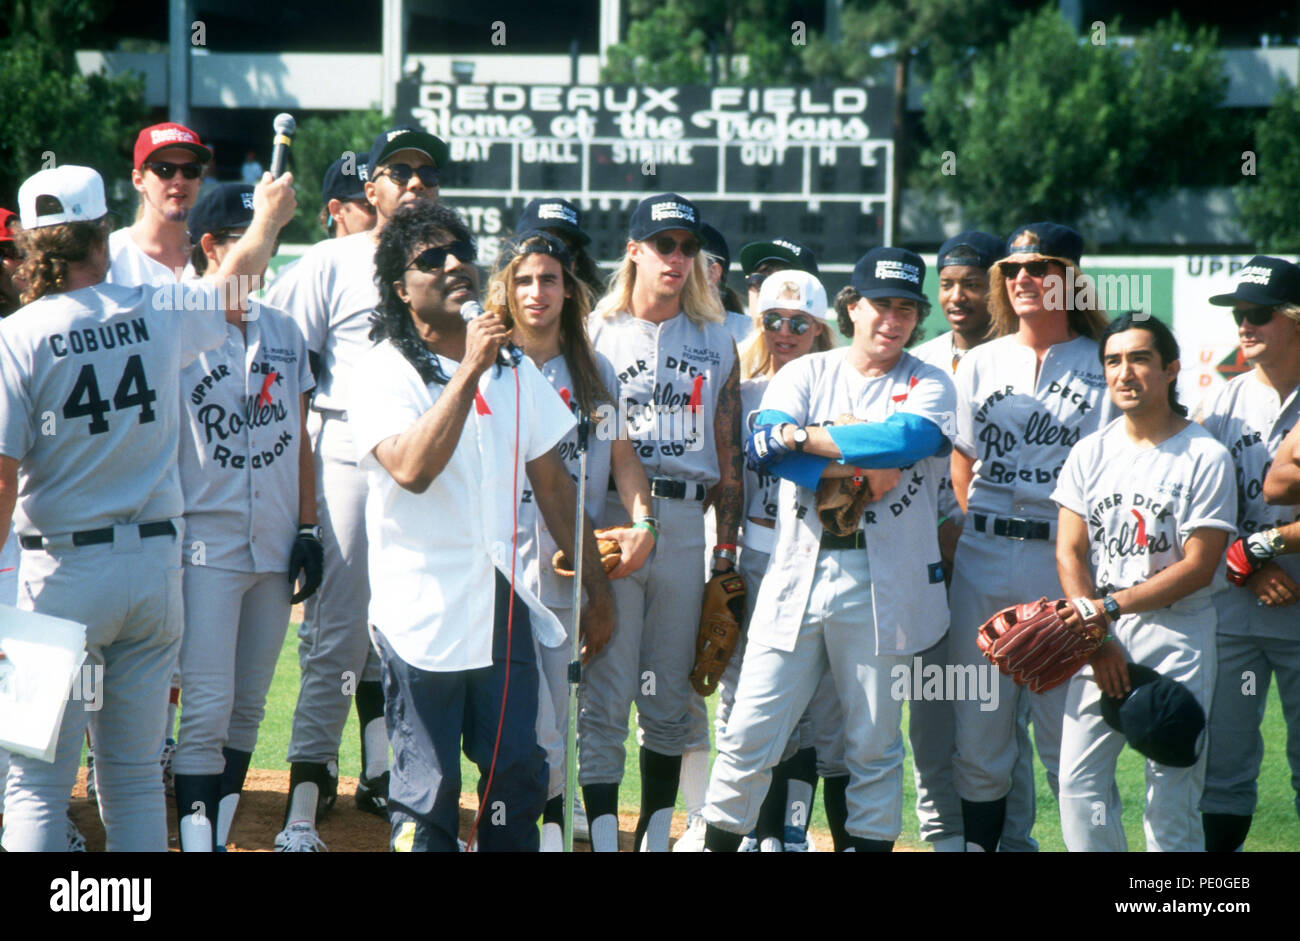 LOS ANGELES, CA - JUNE 14: Musician Layne Staley of Alice in Chains, Singer Little Richard and Jani Lane, rapper Young MC attend T.J. Martell Benefit Baseball Game on June 14, 1992 at Dedeaux Field in Los Angeles, California. Photo by Barry King/Alamy Stock Photo Stock Photo